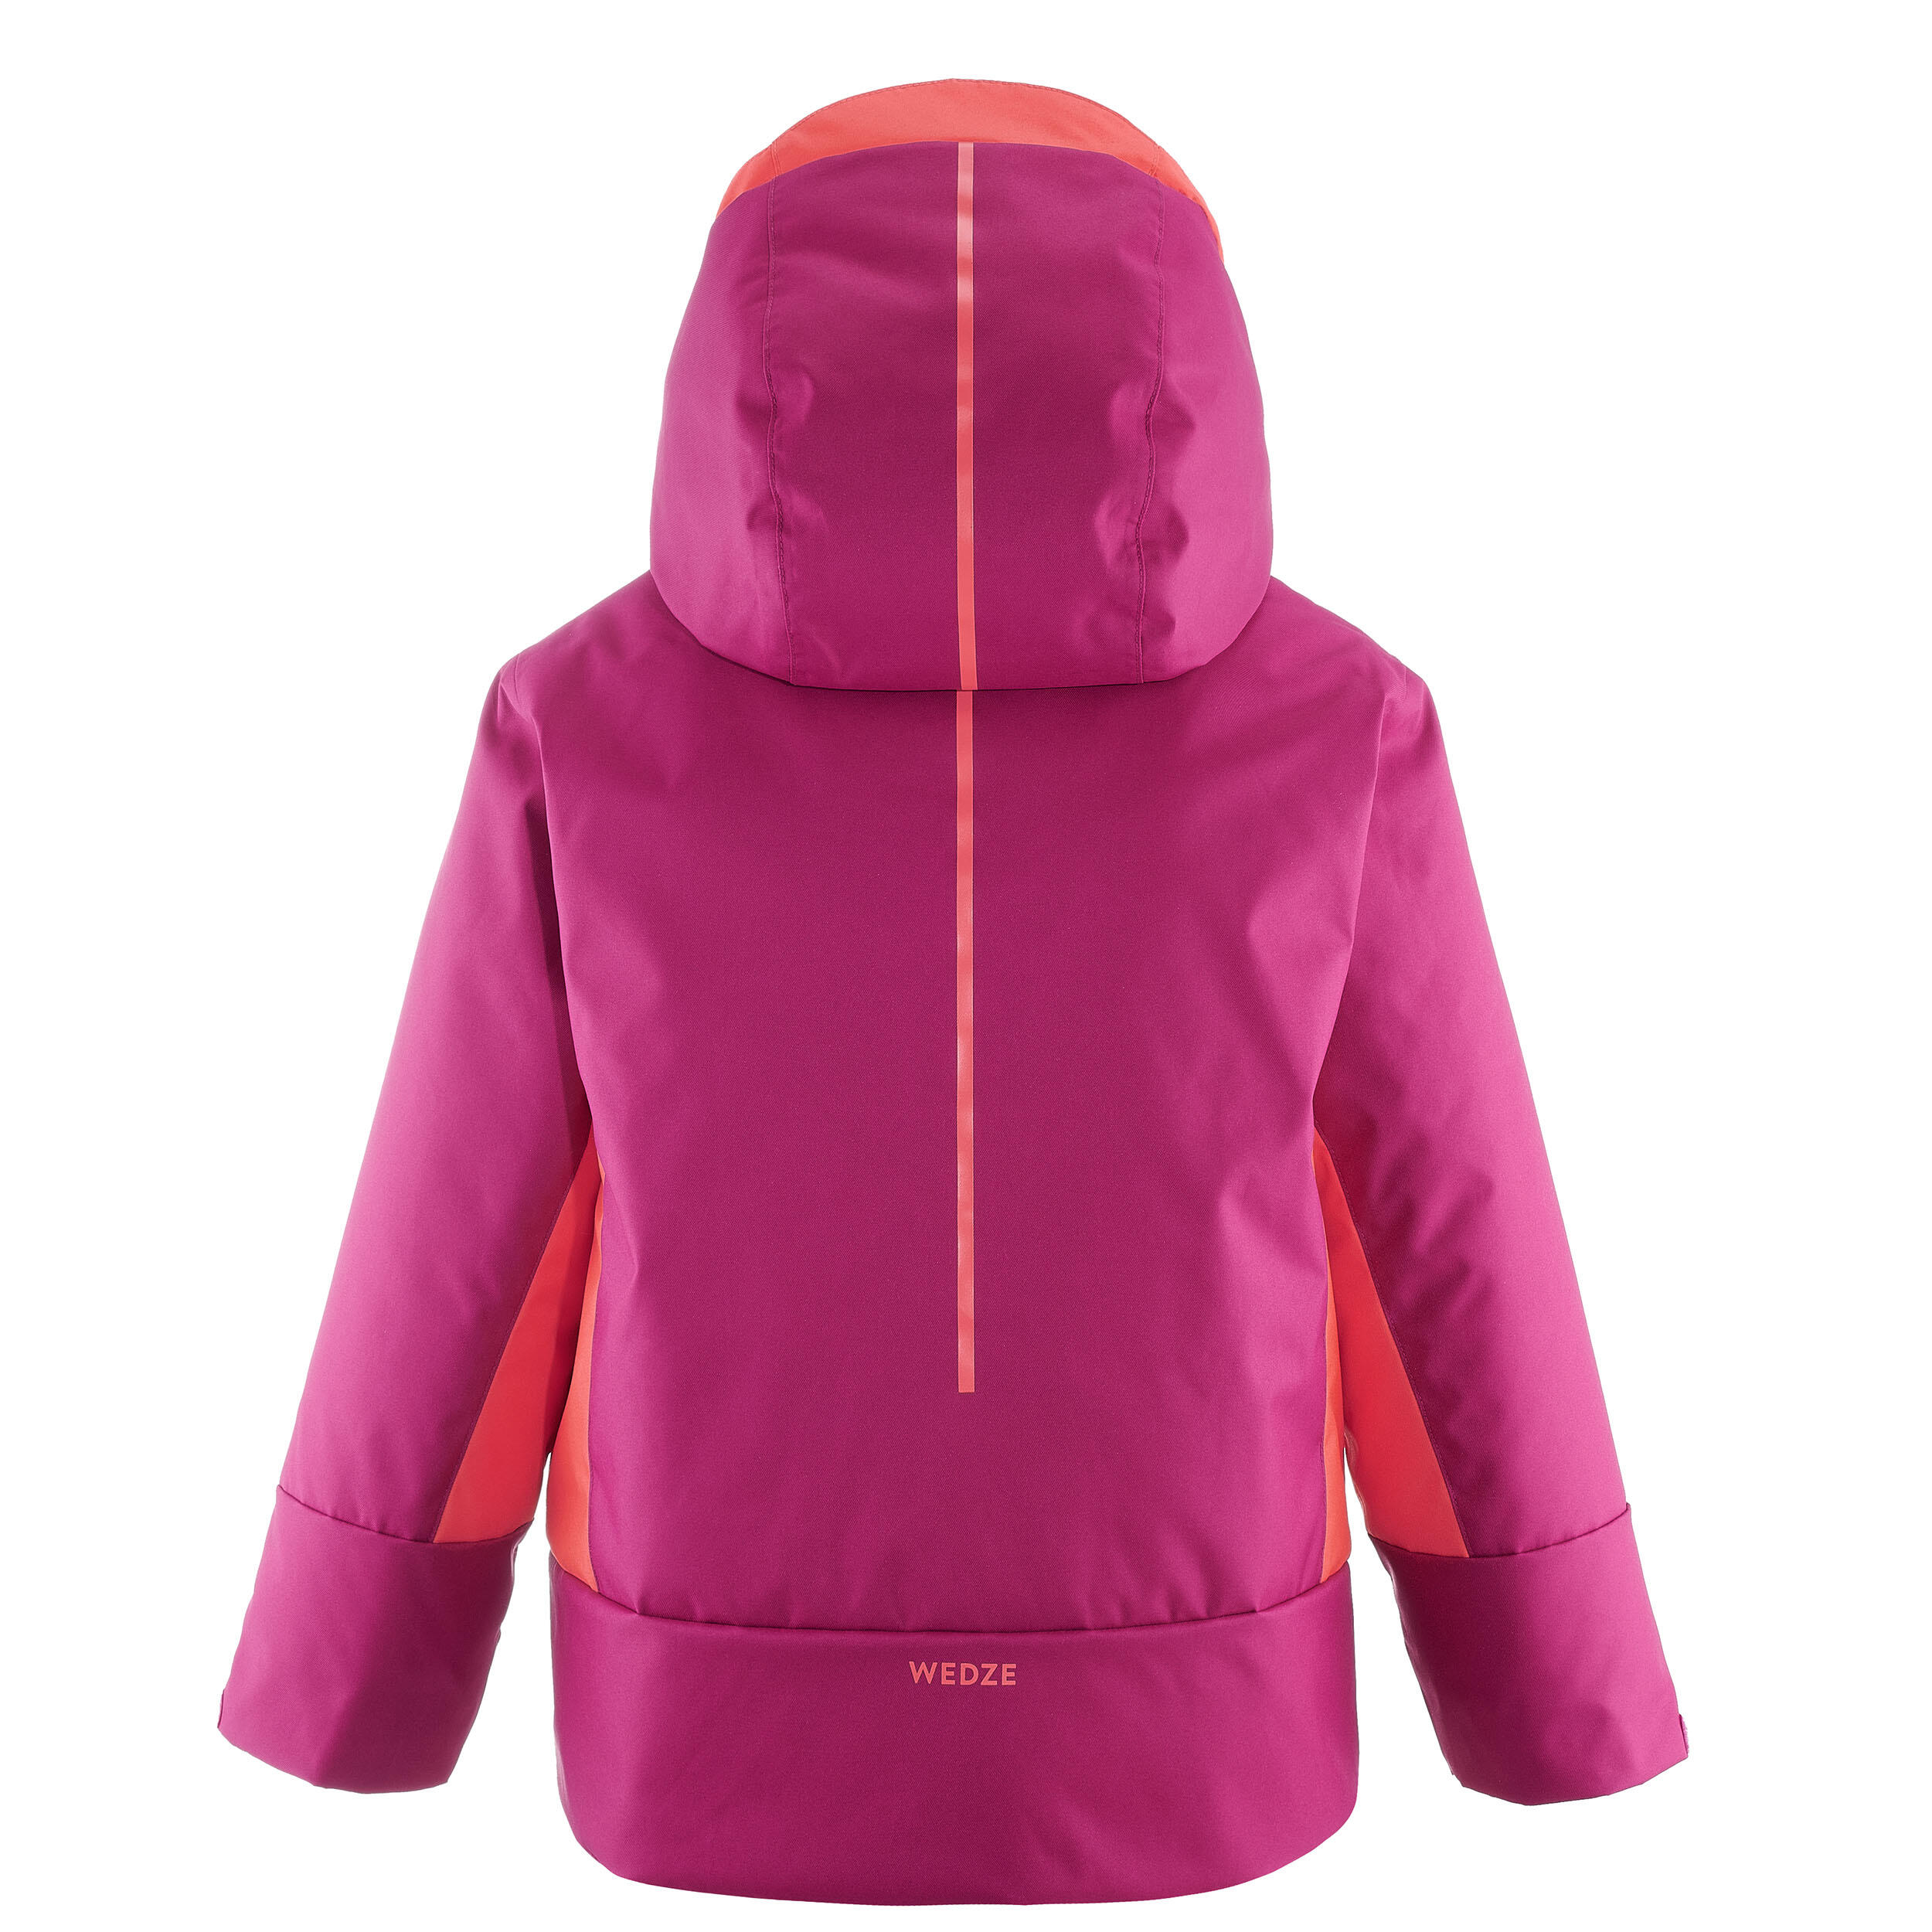 Children's Skiing Jacket Pull'n Fit - Purple/Coral 4/10